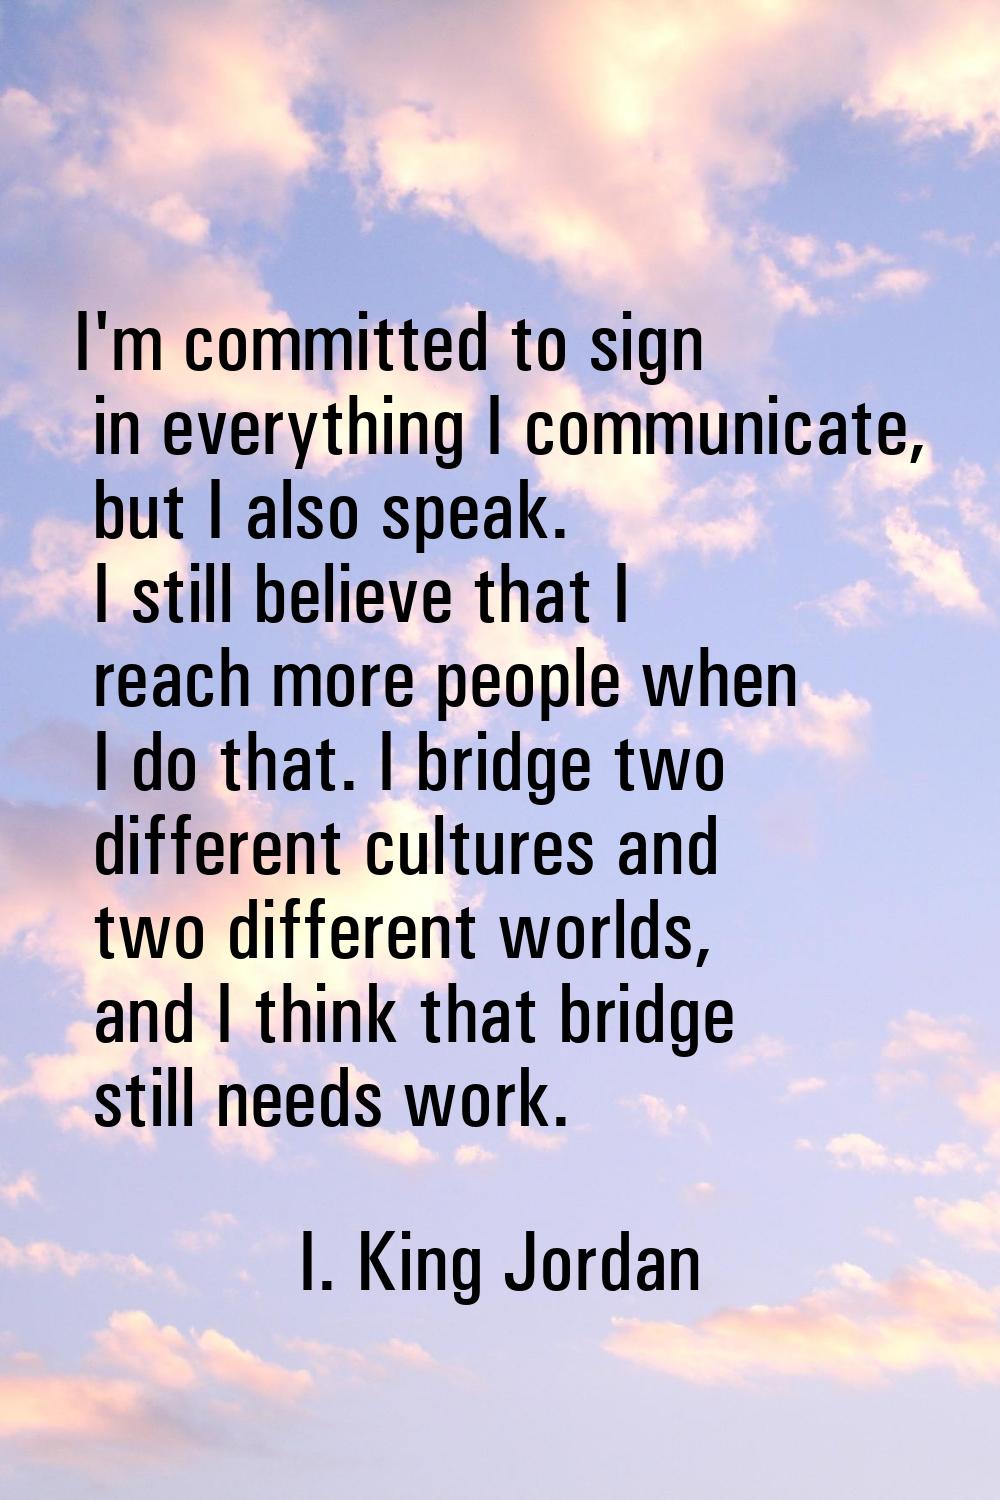 I'm committed to sign in everything I communicate, but I also speak. I still believe that I reach m